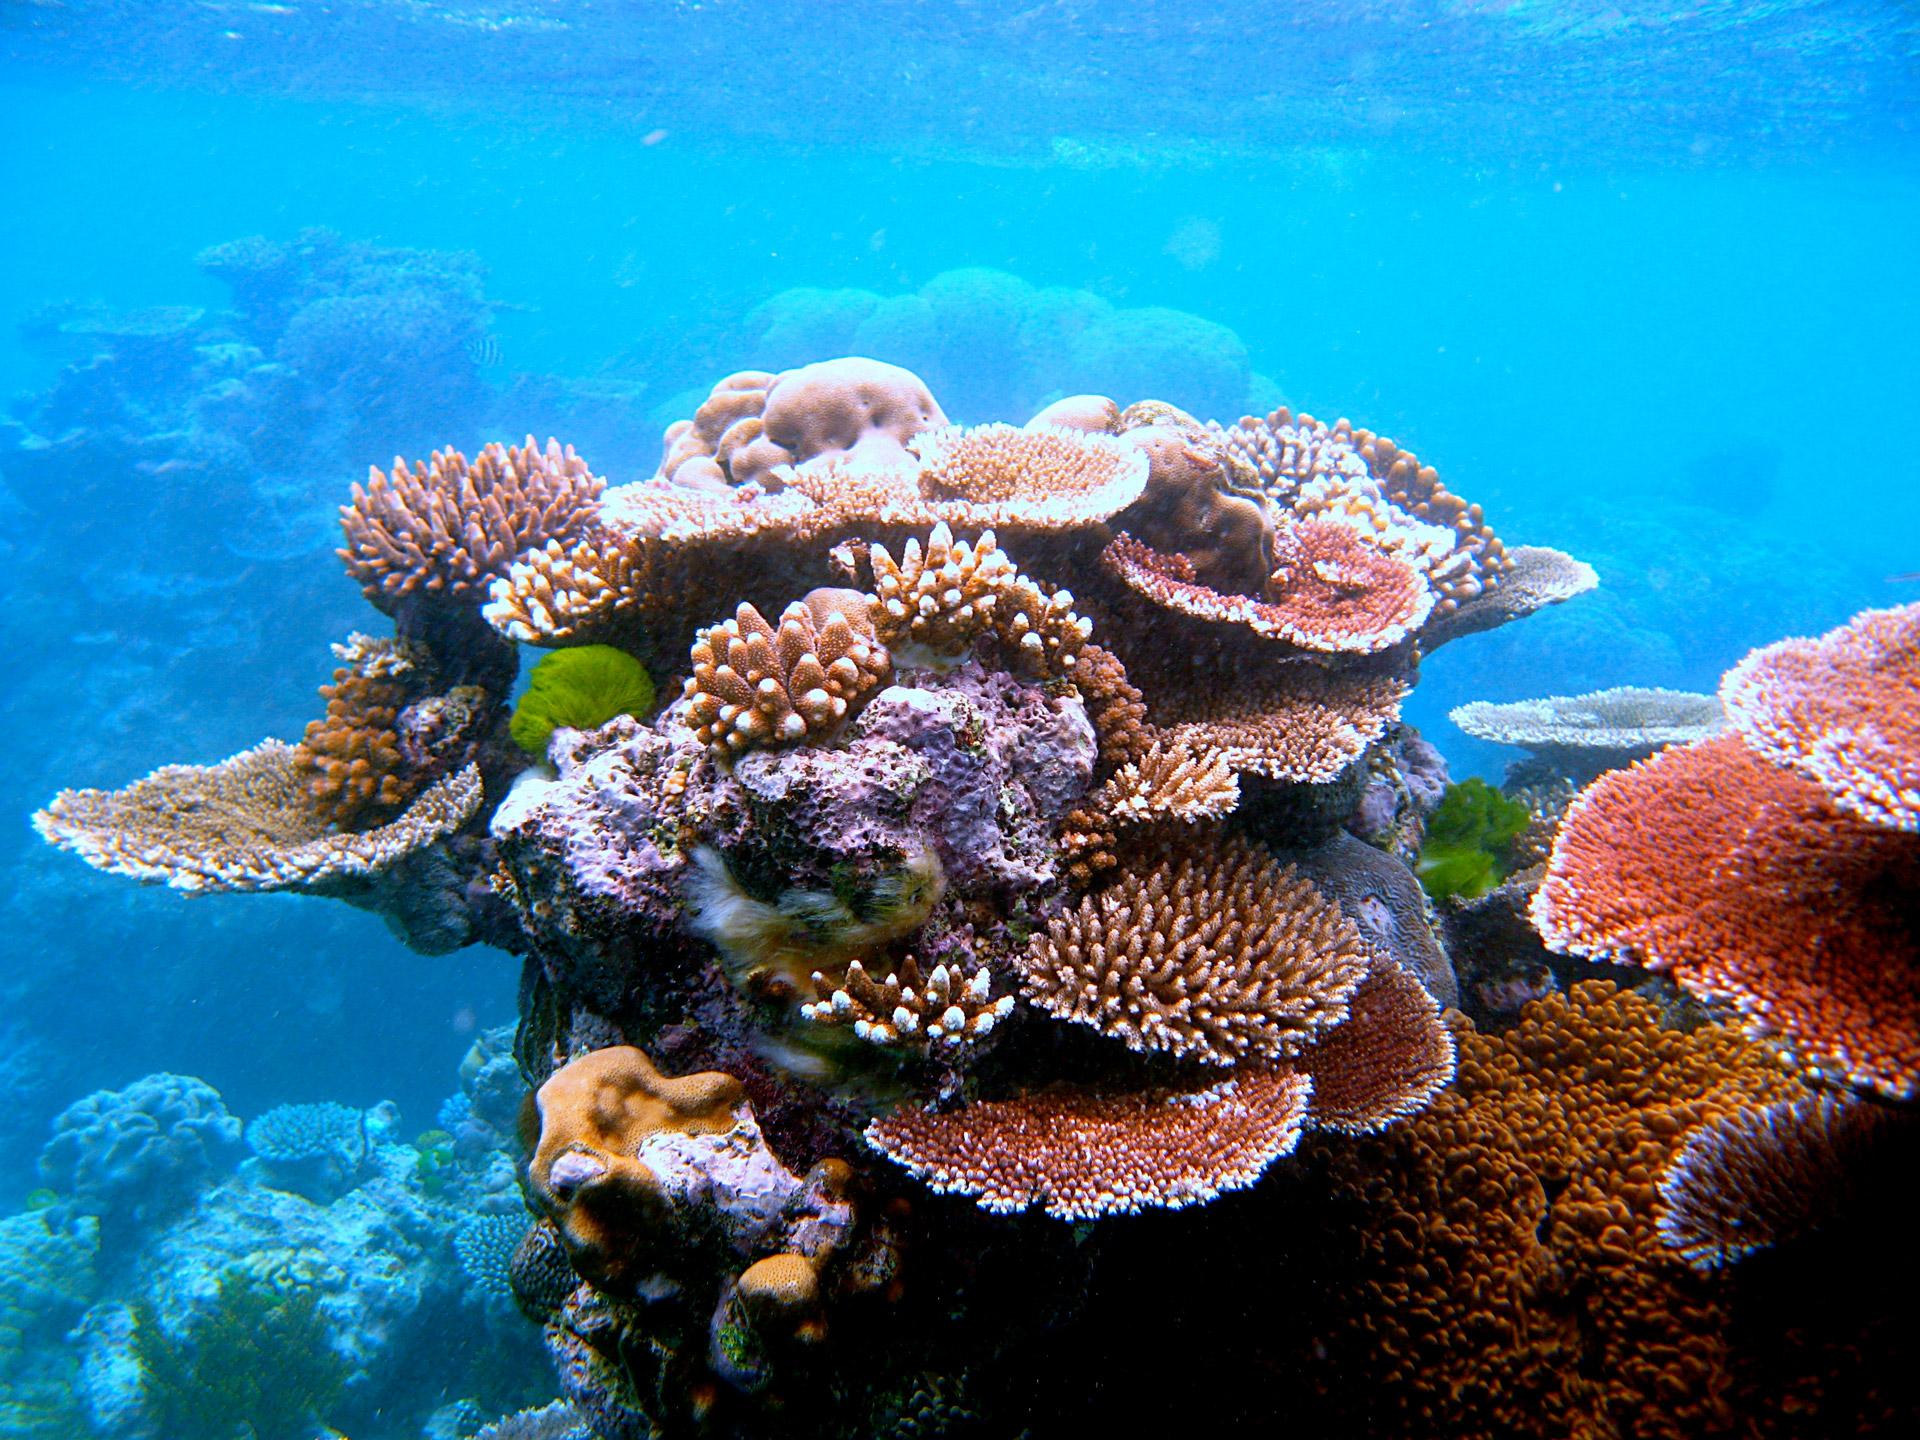 Effects of climate change on the diversity of Great Barrier Reef marine life